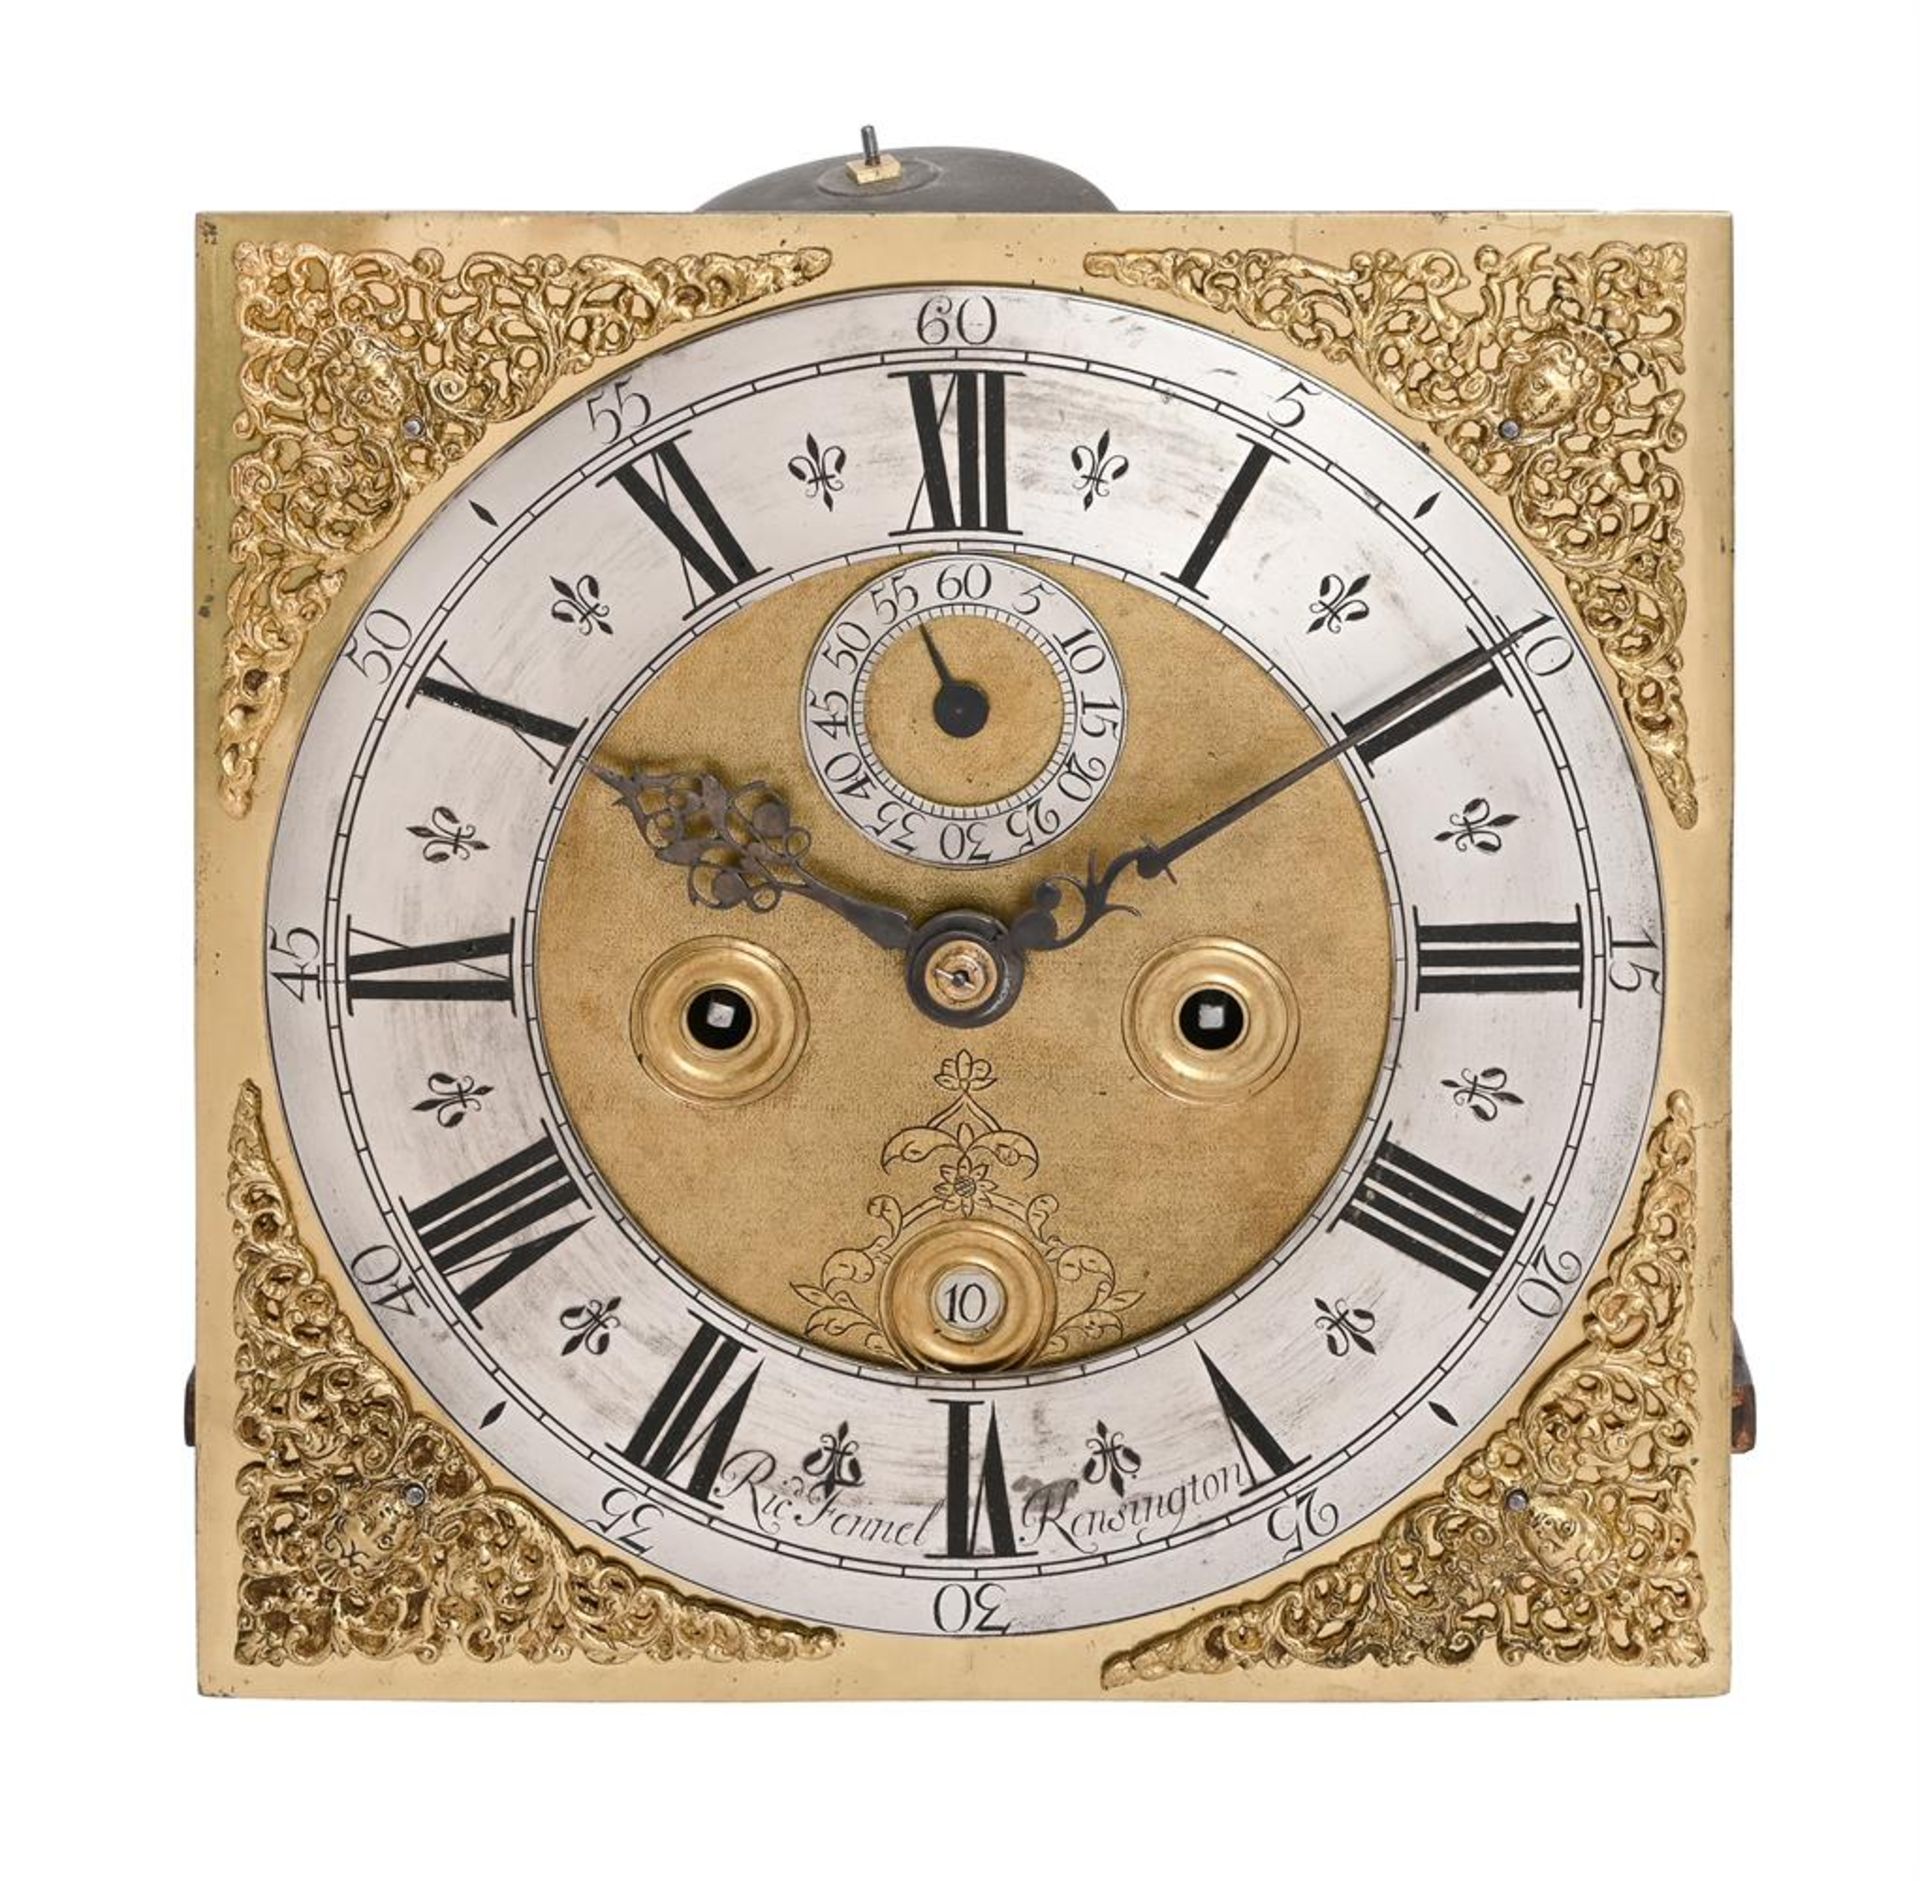 A WALNUT EIGHT-DAY LONGCASE CLOCK WITH AN ELEVEN-INCH DIAL - Image 2 of 4